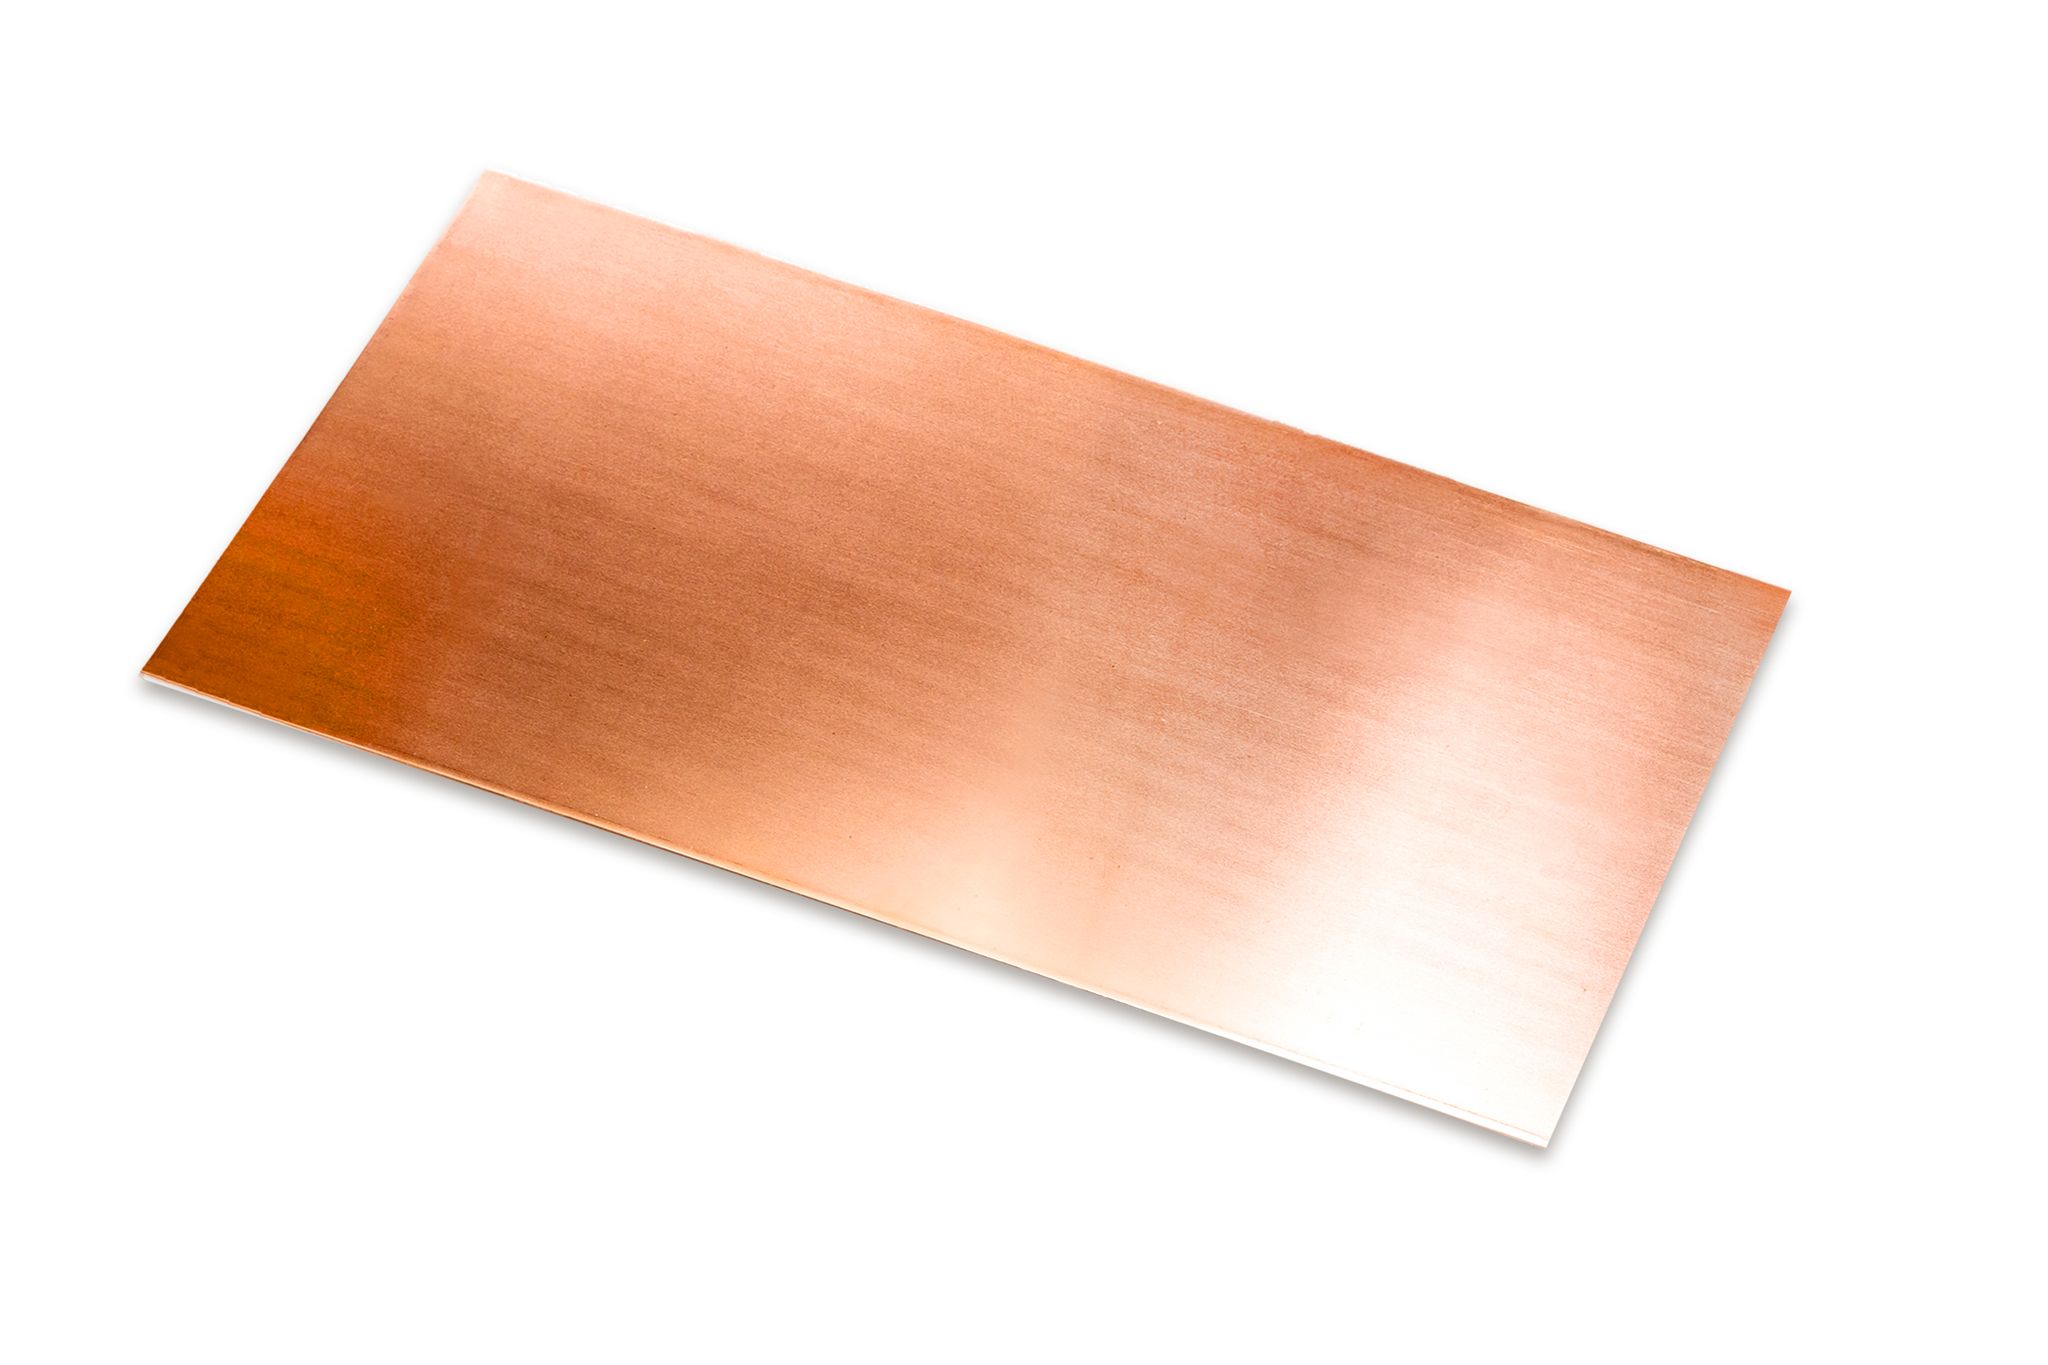 6″x12″ 99.9% Pure Copper Sheet Blank Rectangle Dead Soft Made in USA